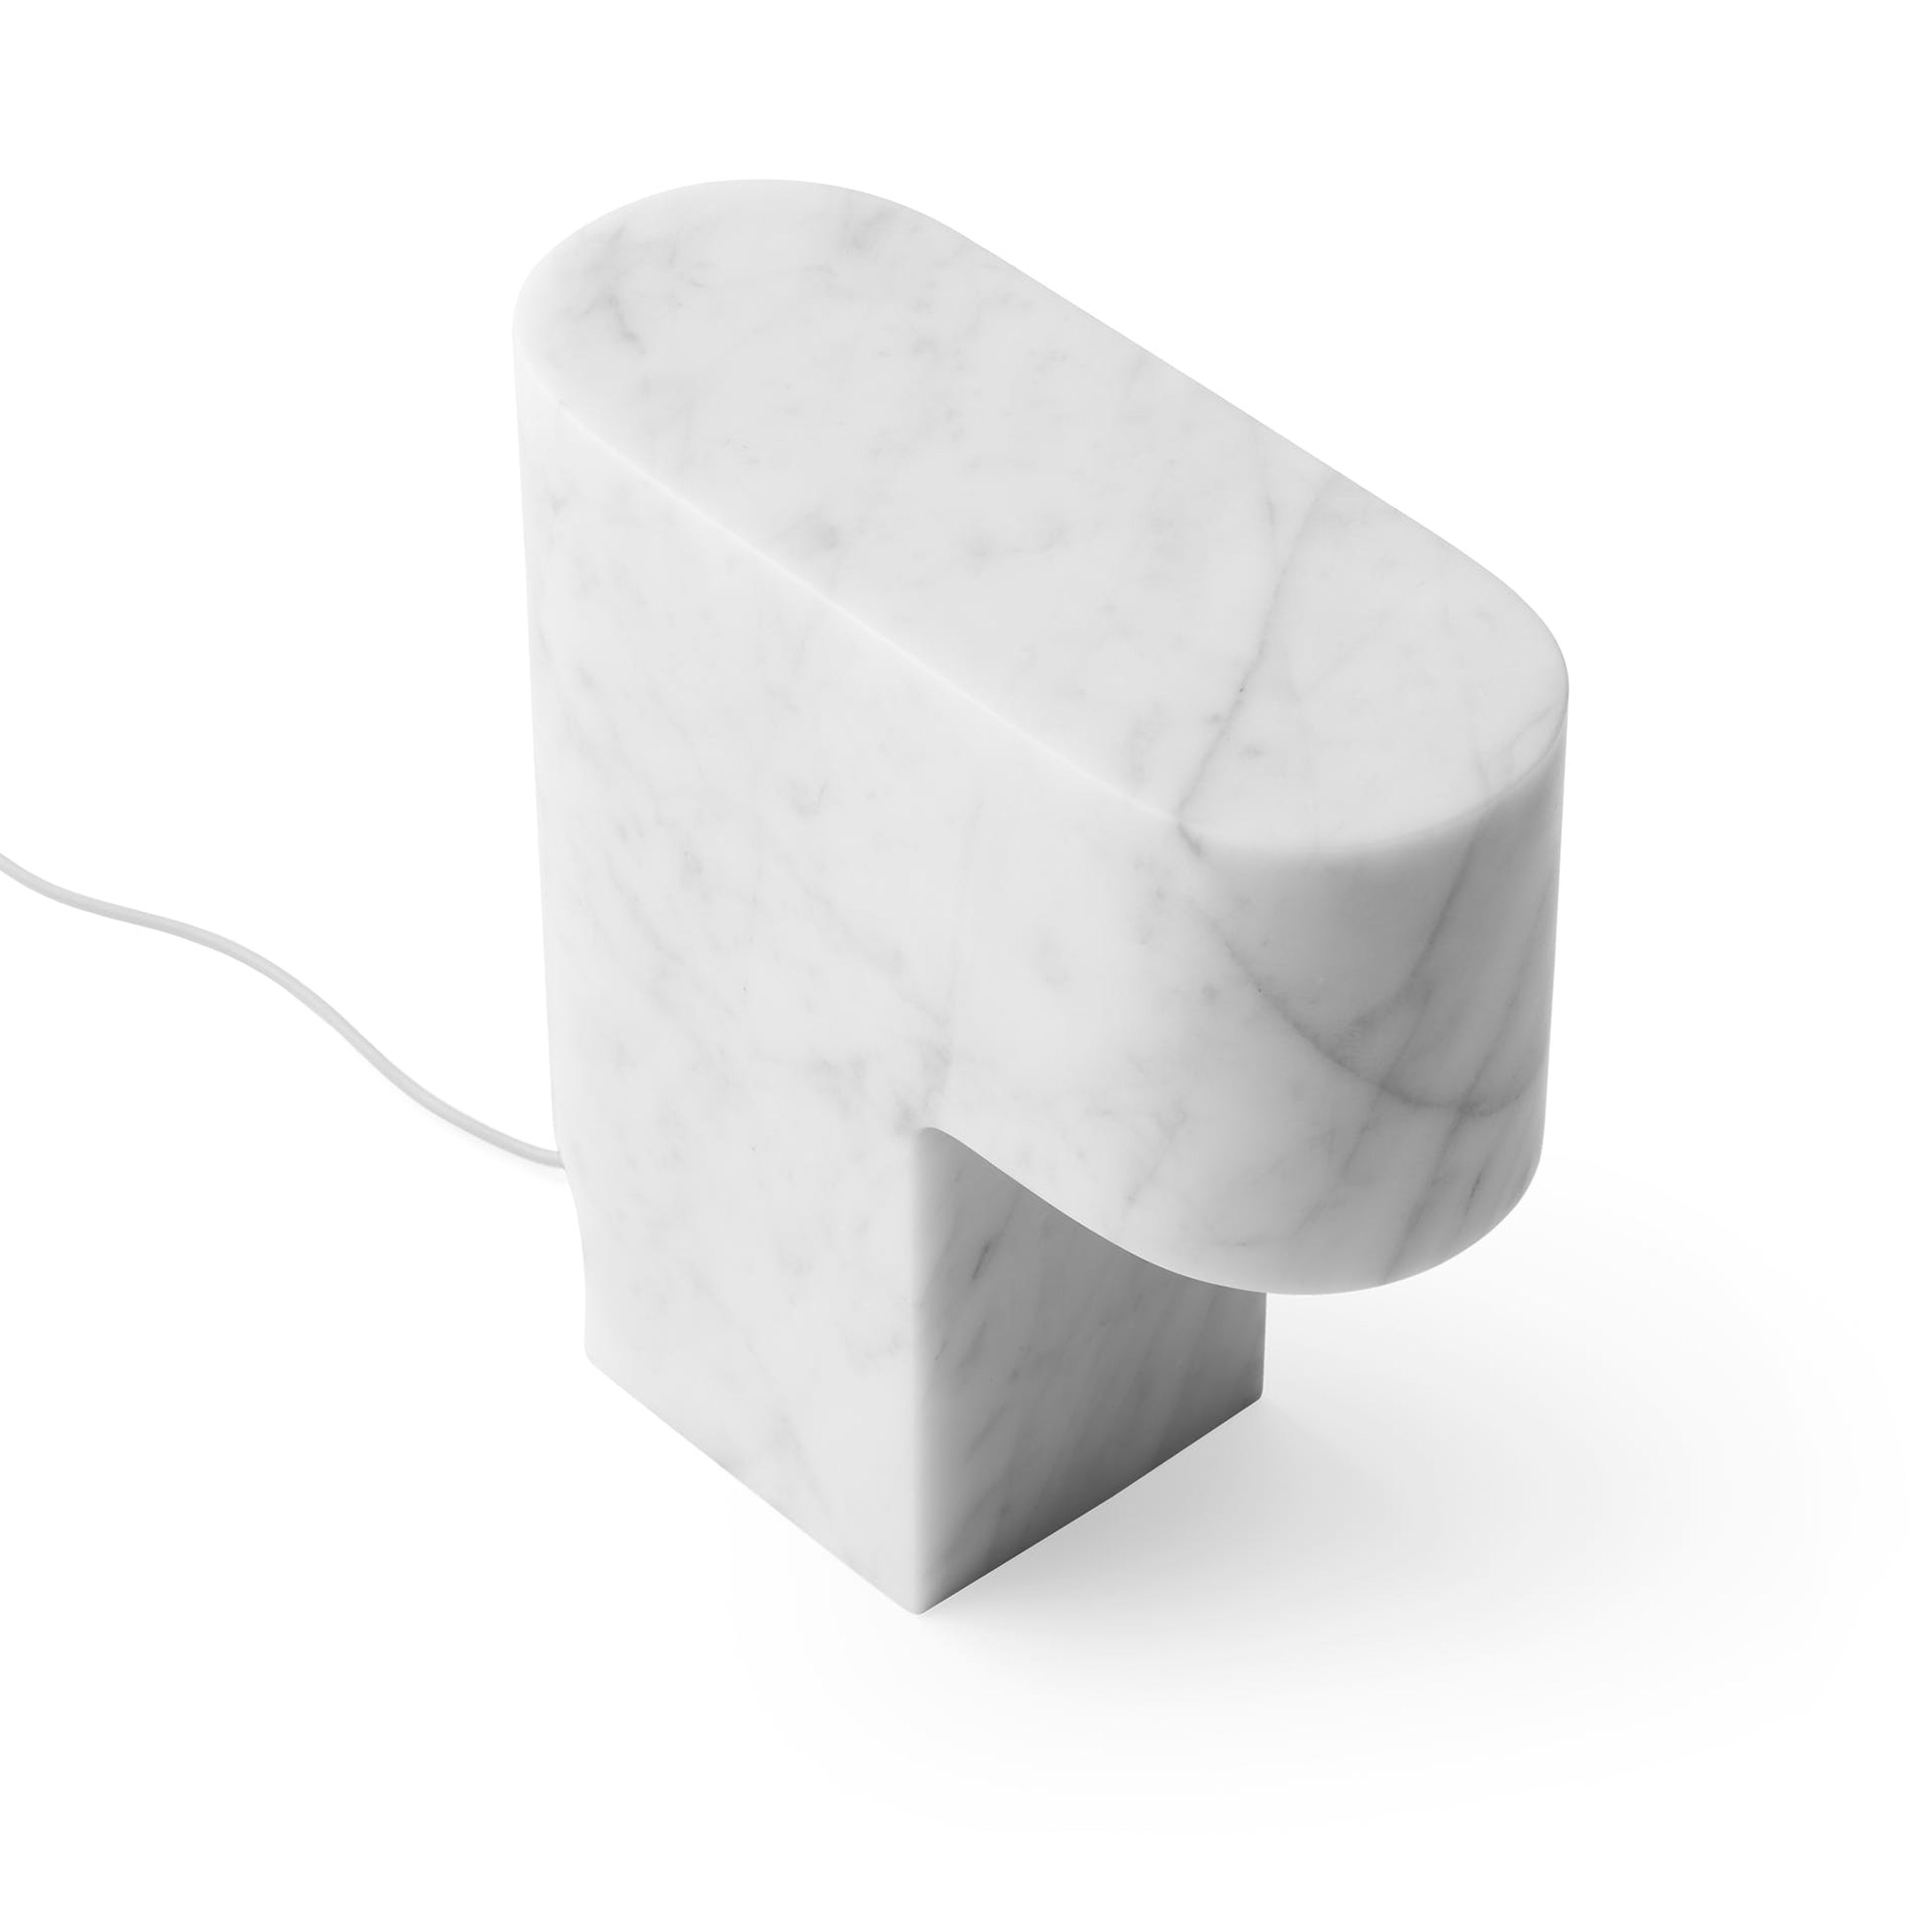 The W223 Table Lamp by John Pawson for Wästberg, marble variation, top view